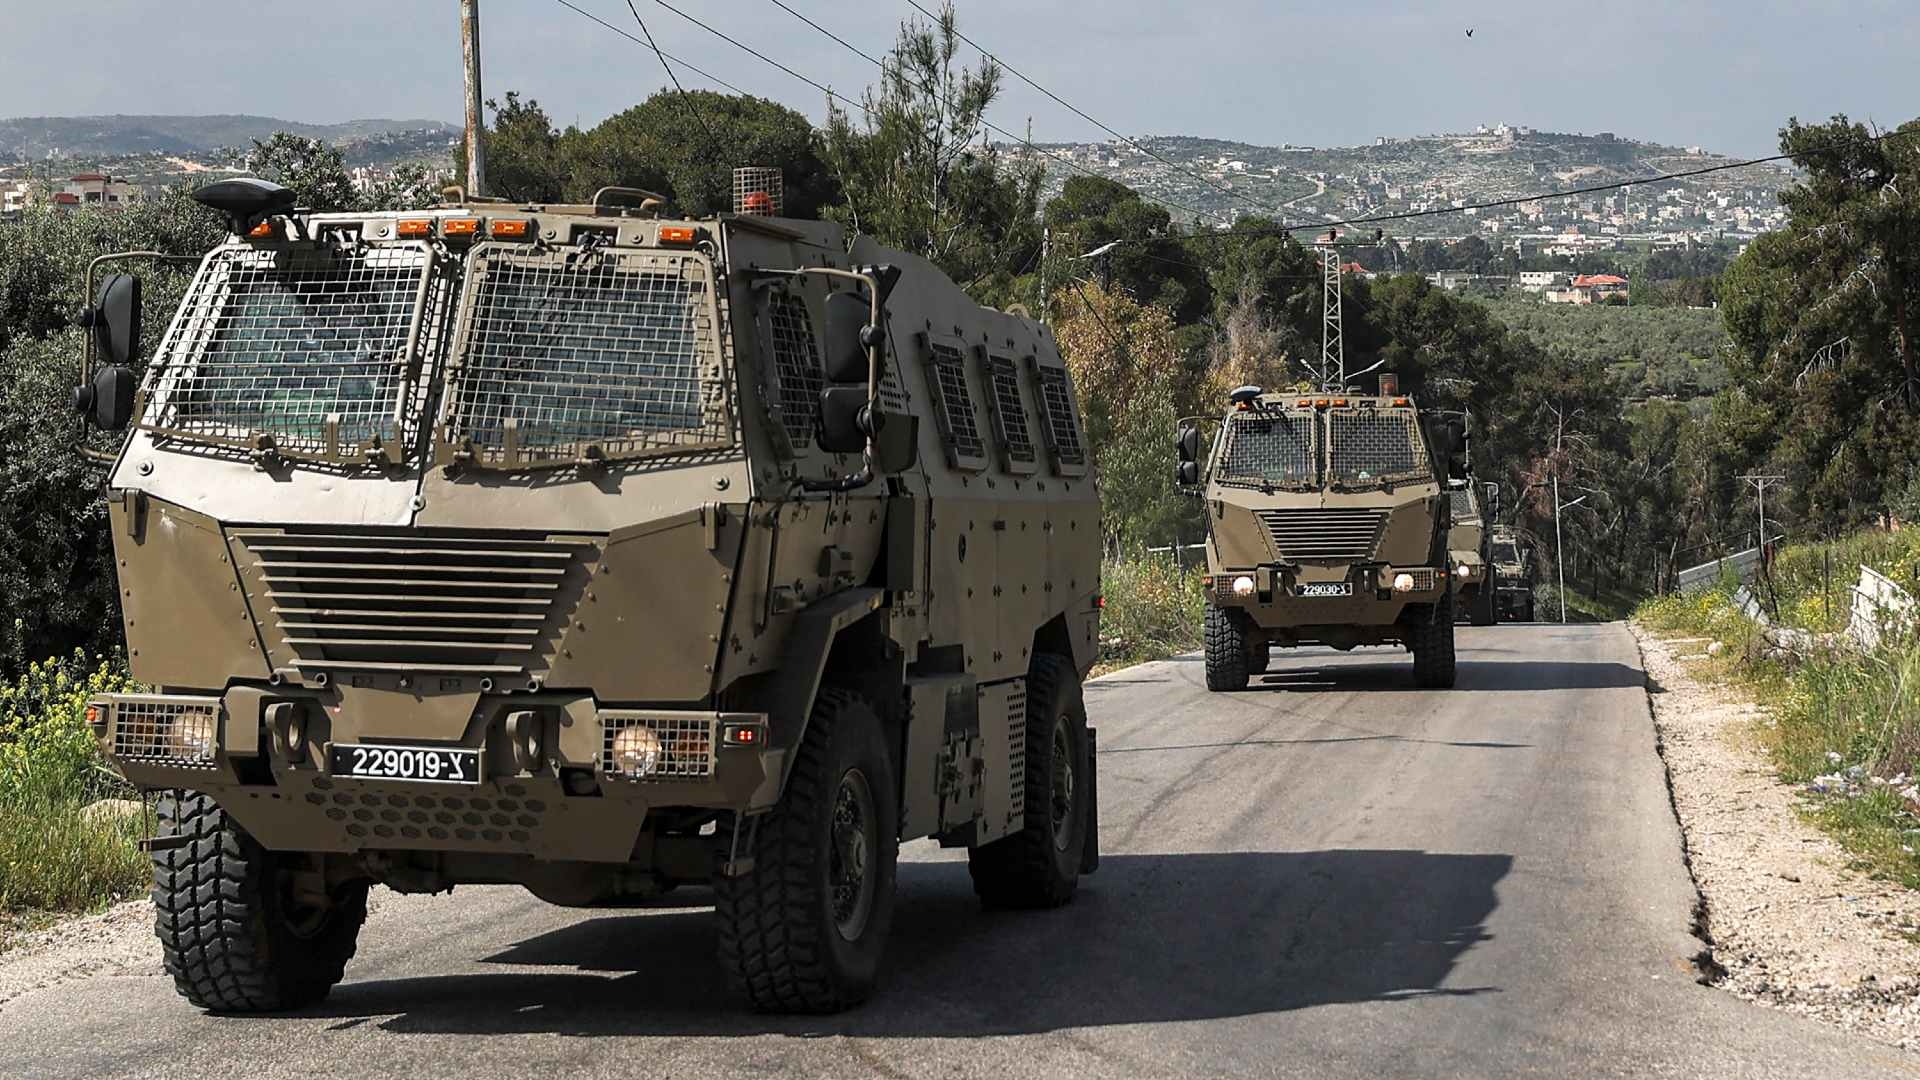 Israeli military vehicles drive during clashes between Palestinians and Israeli forces in the Palestinian refugee camp of Jenin in the occupied West Bank on 9 April 2022.